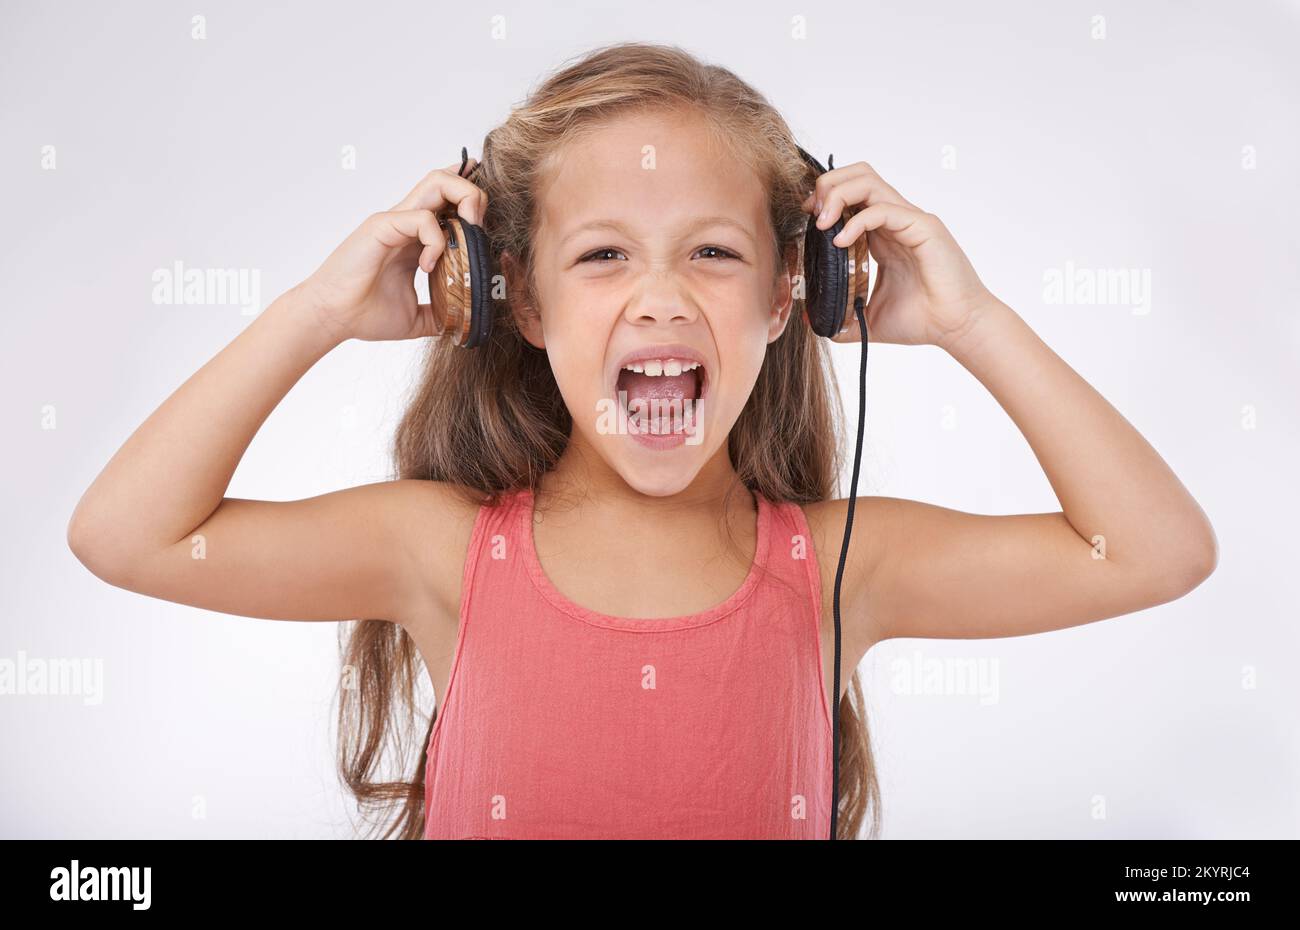 Feel the noise. A young girl screaming while wearing a pair of headphones. Stock Photo